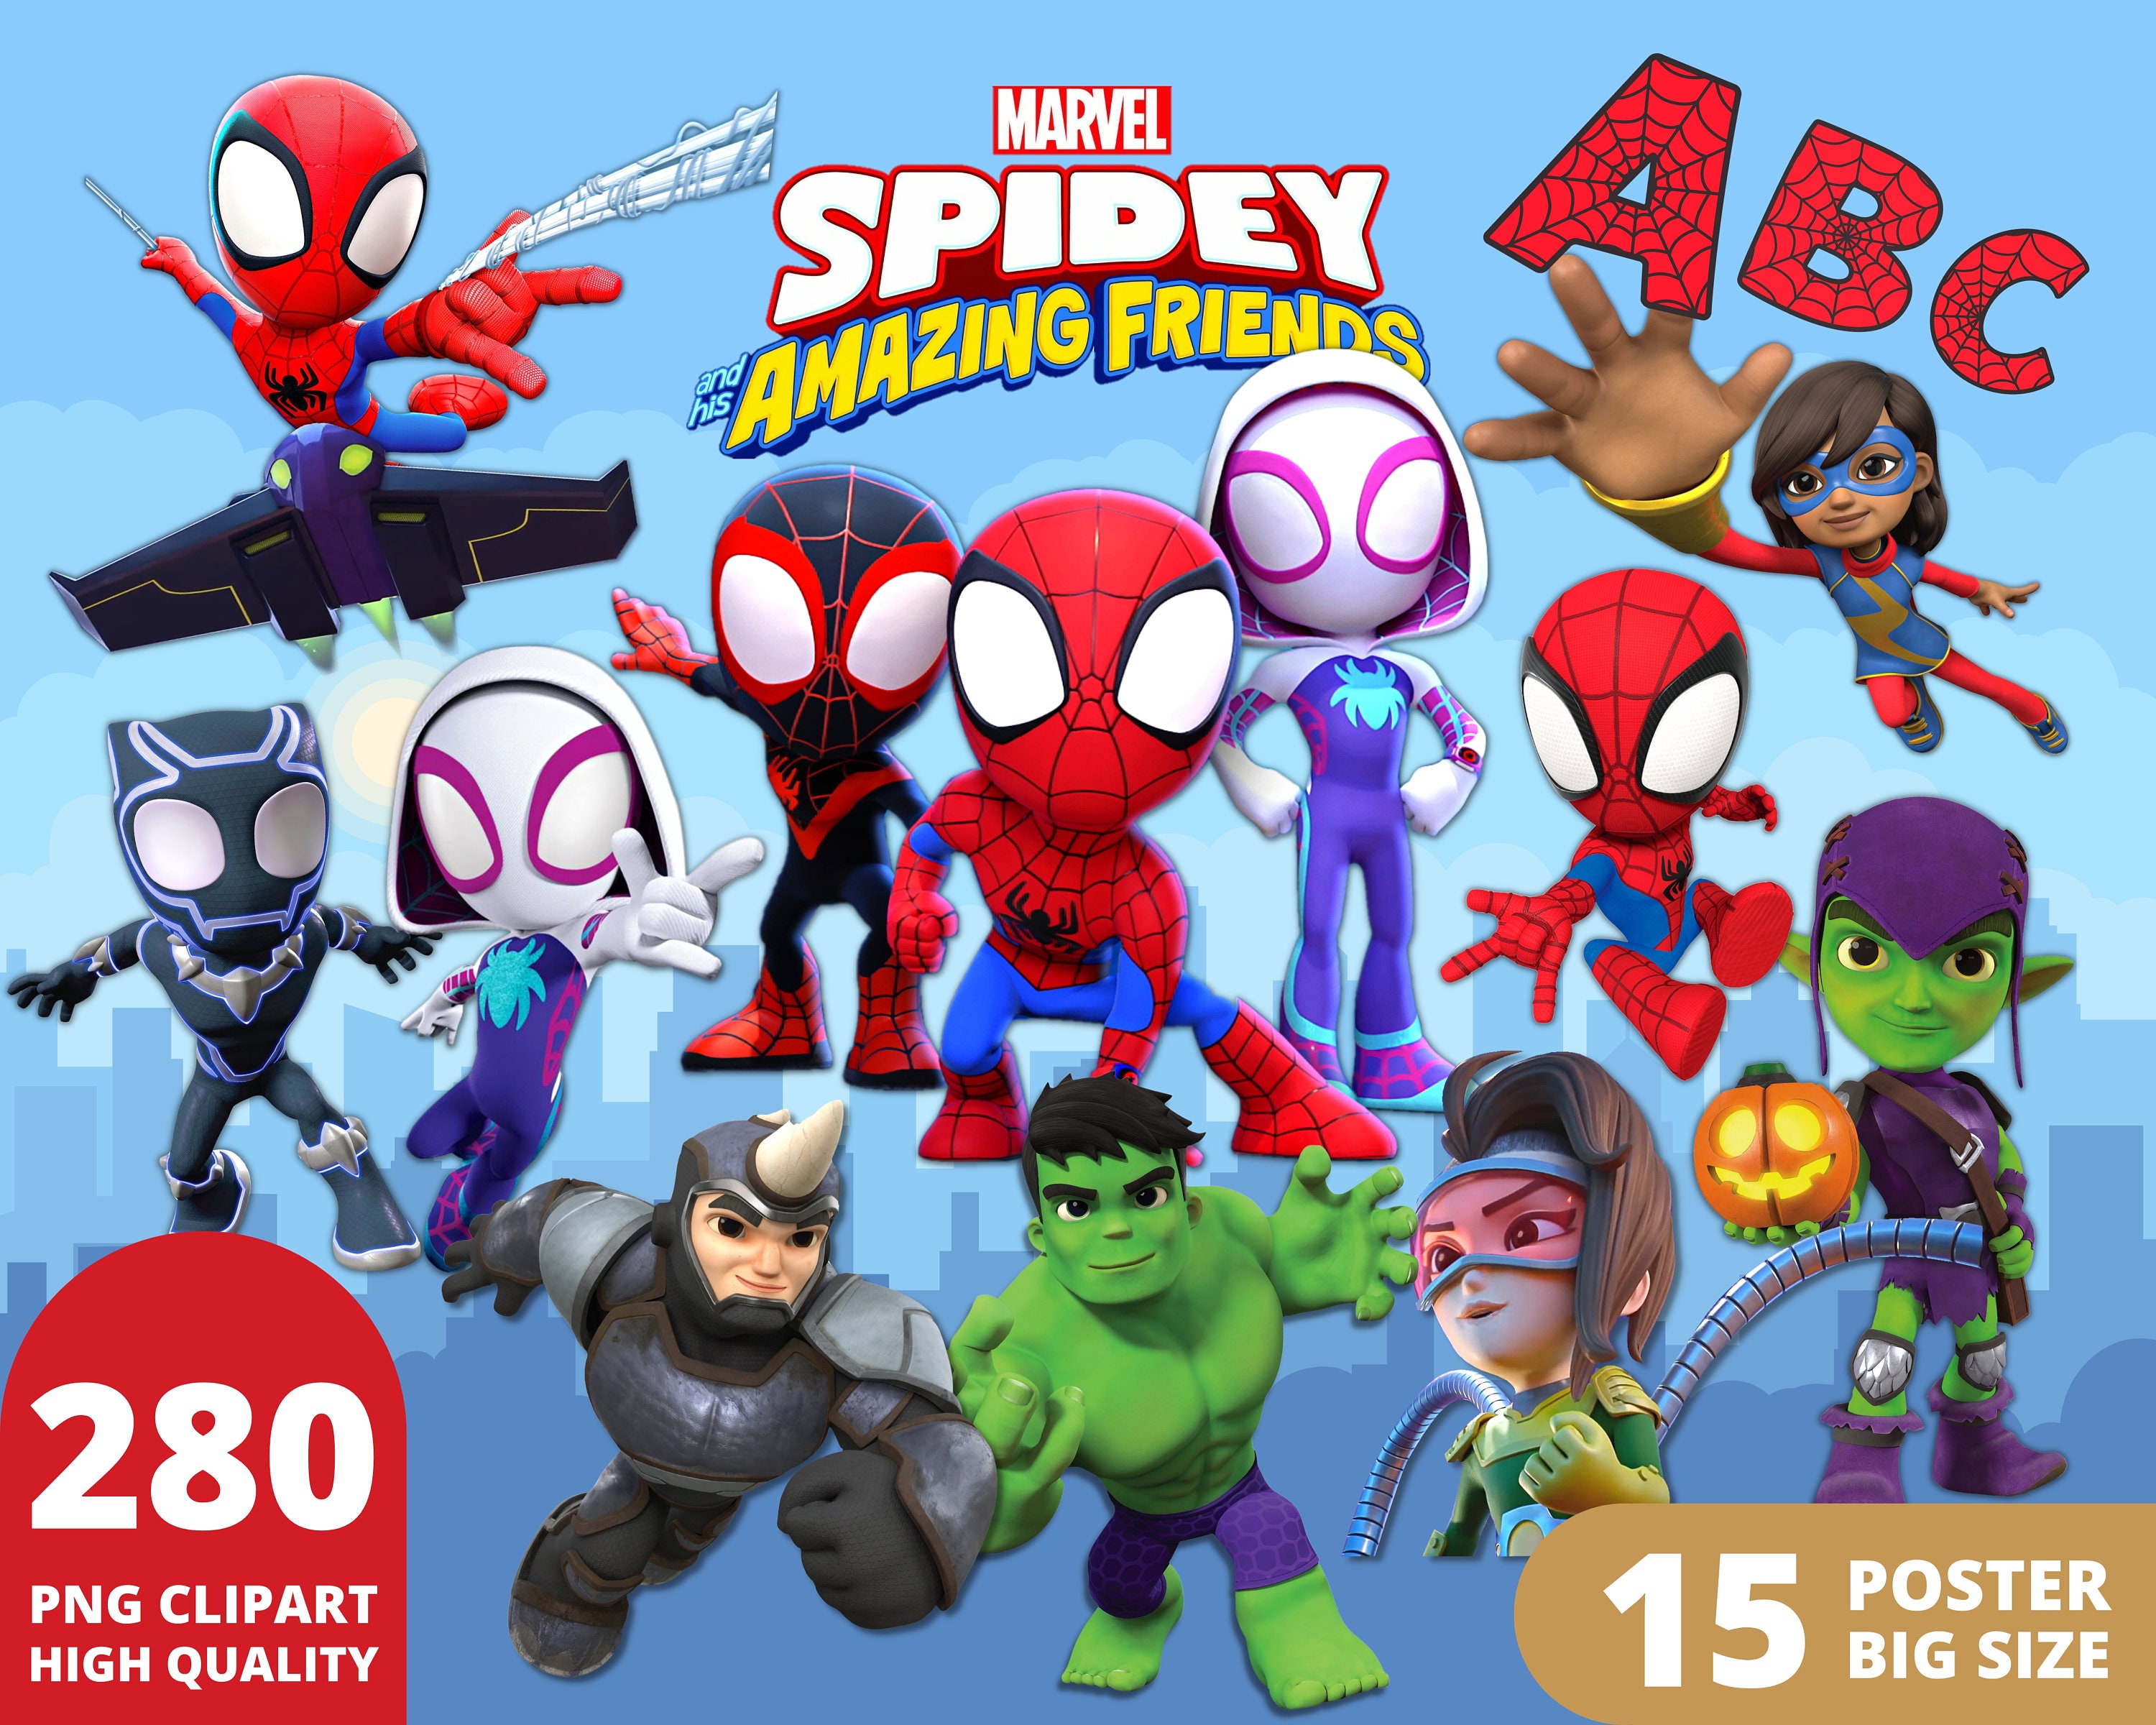 Spidey and His Amazing Friends Clipart PNG Spidey Superhero - Etsy ...